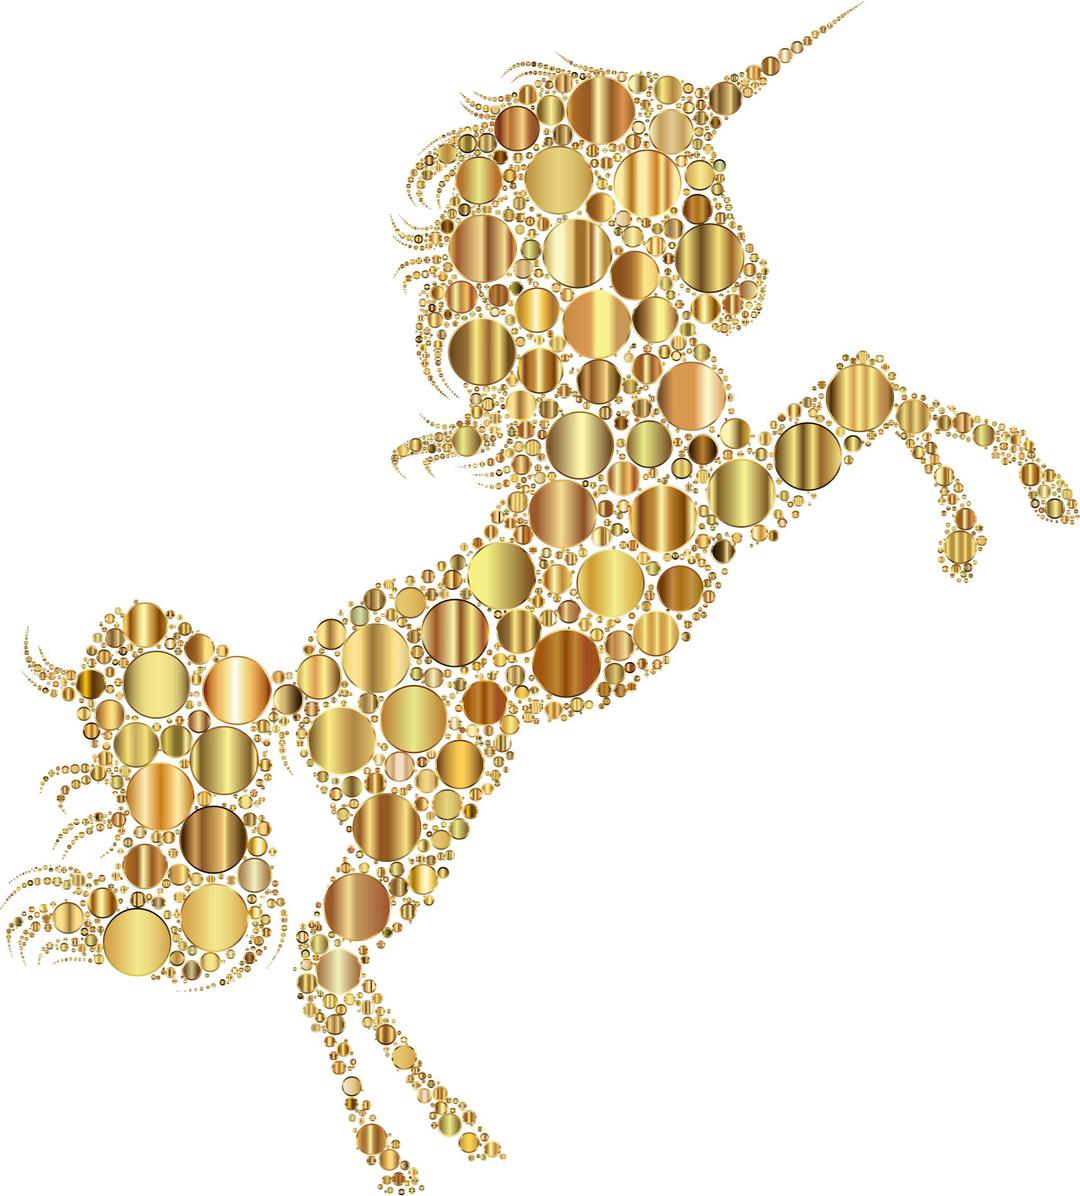 Gold Unicorn Silhouette 2 Circles 2 No Background png transparent